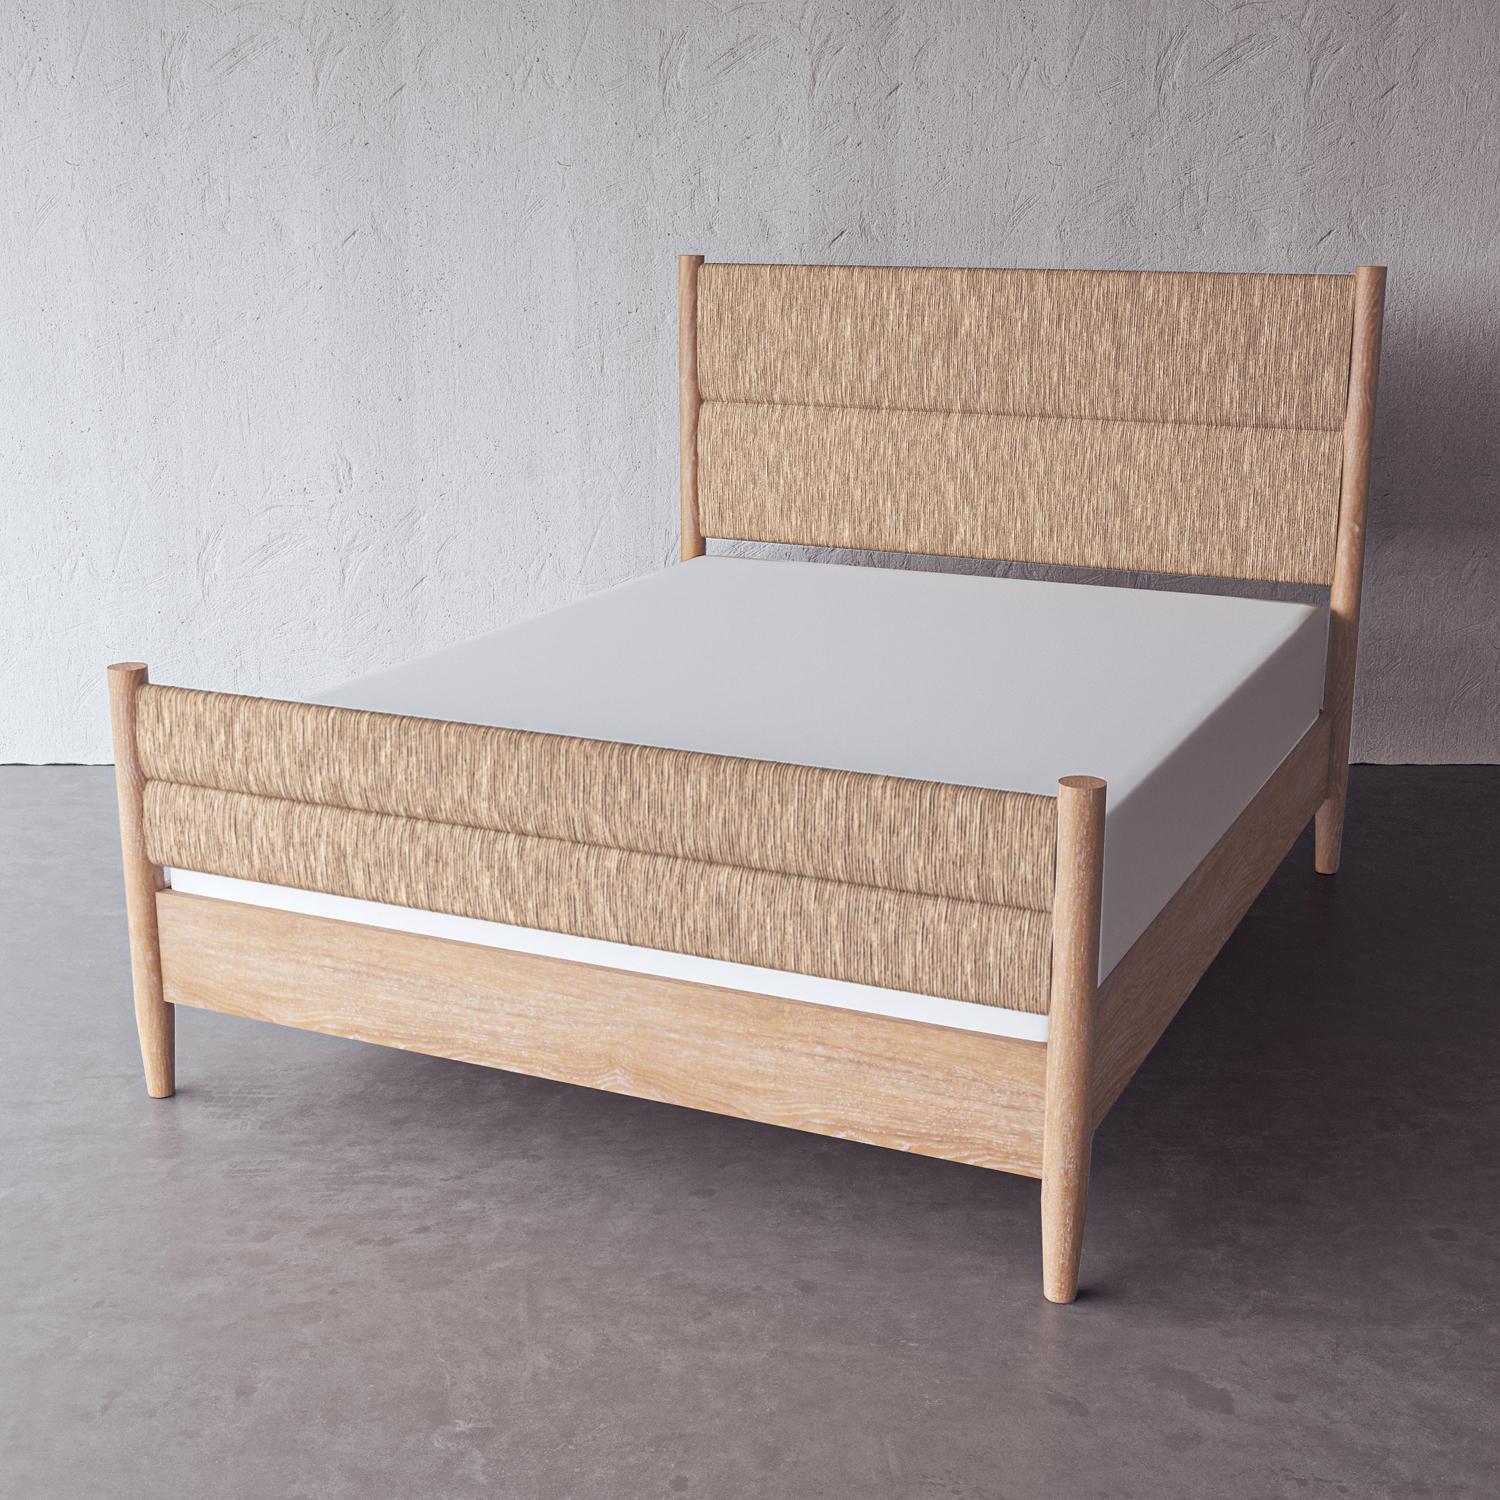 Architectural rush weaves between clean, simple posts make a textural headboard and footboard on this cerused European oak bed frame. Handmade by artisans in Vietnam, this piece is available in king and queen size.